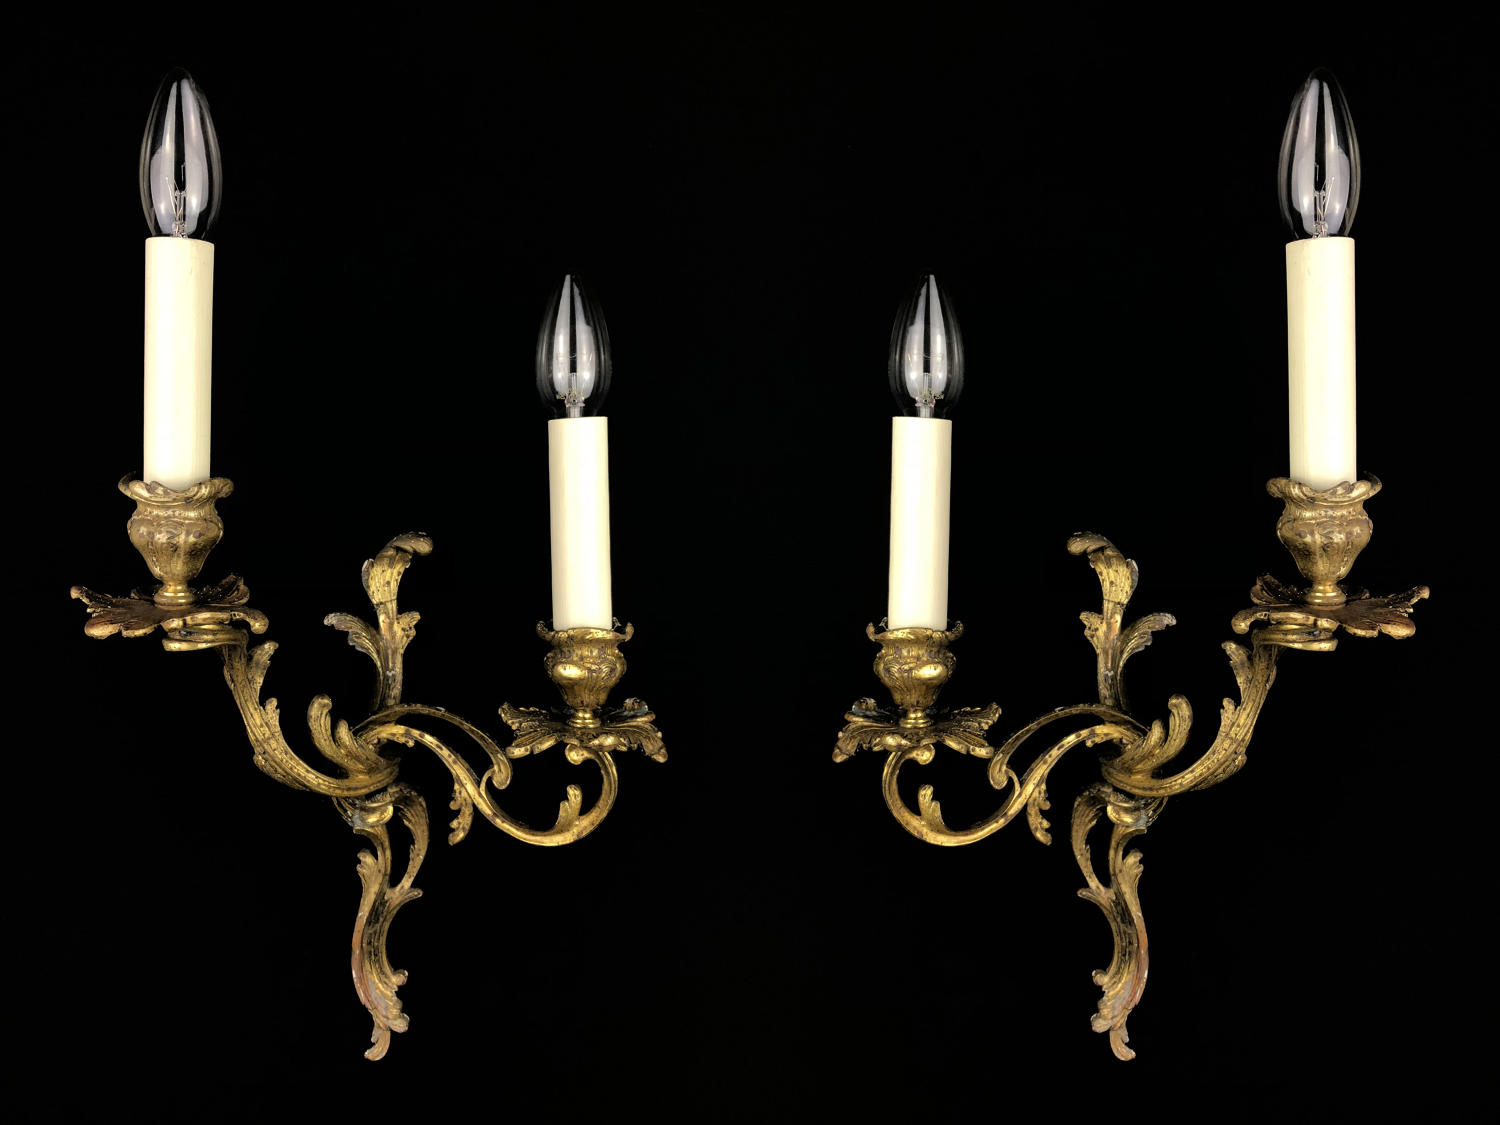 A pair of Rococo style wall lights